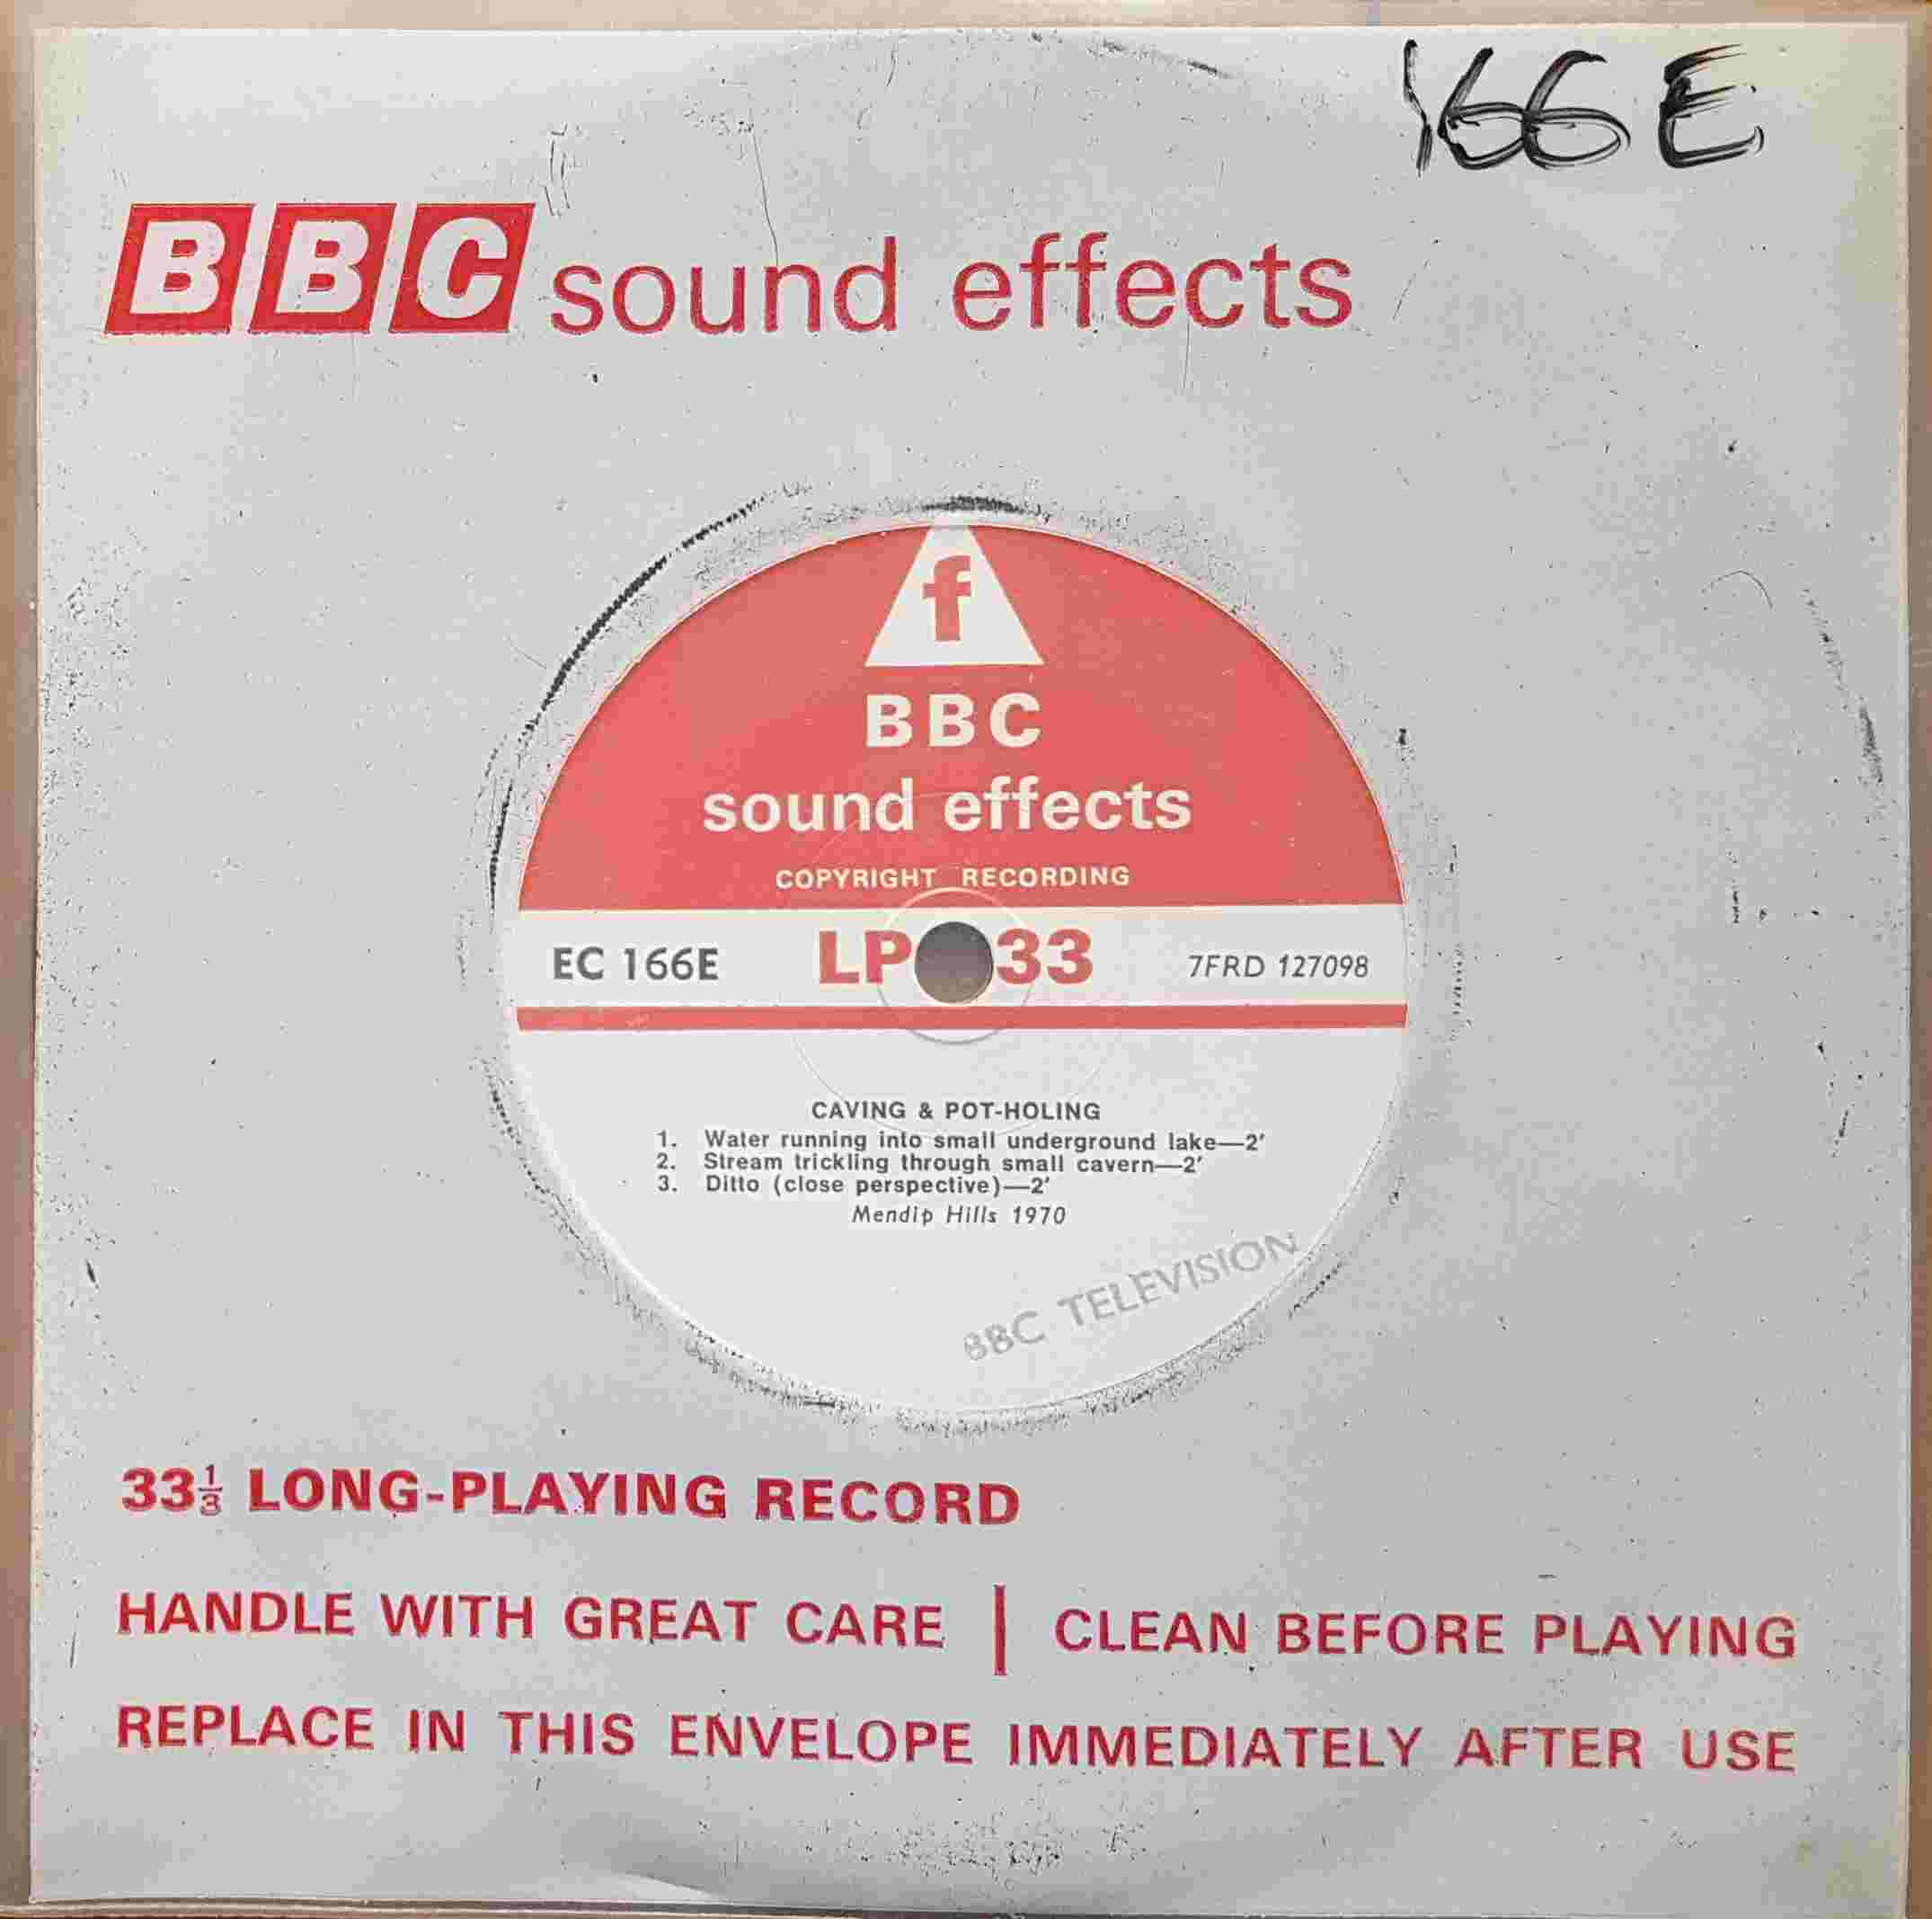 Picture of EC 166E Caving & pot-holing by artist Not registered from the BBC singles - Records and Tapes library